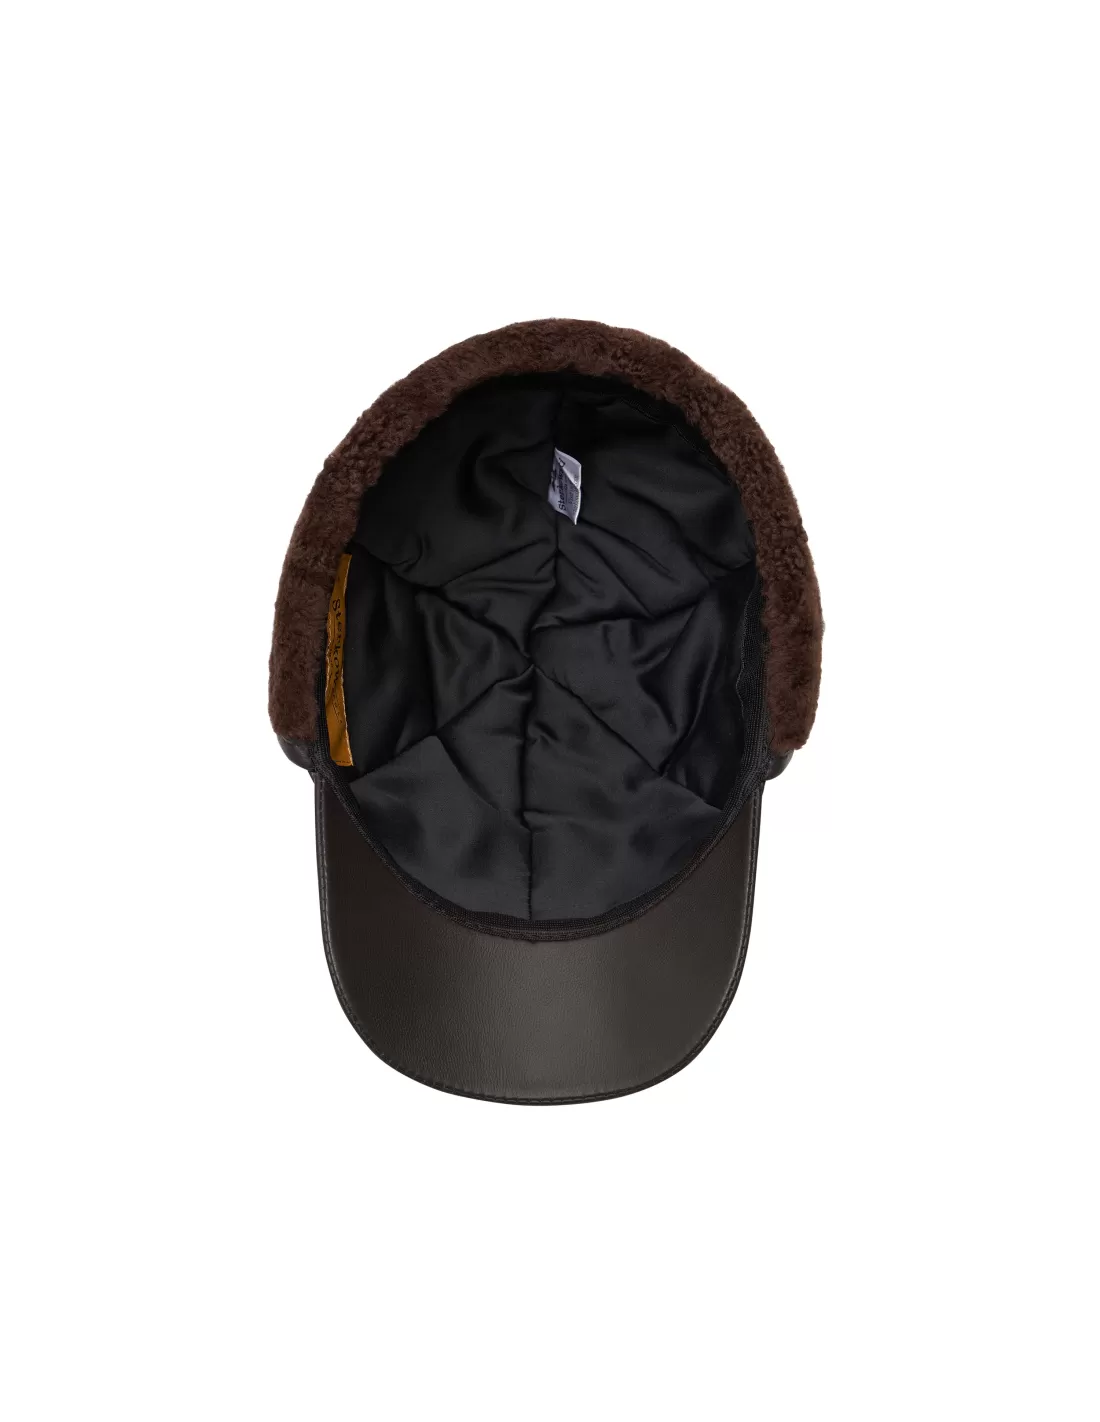 Sigmund - leather hunting style cap with 8 panels and ear flap cap